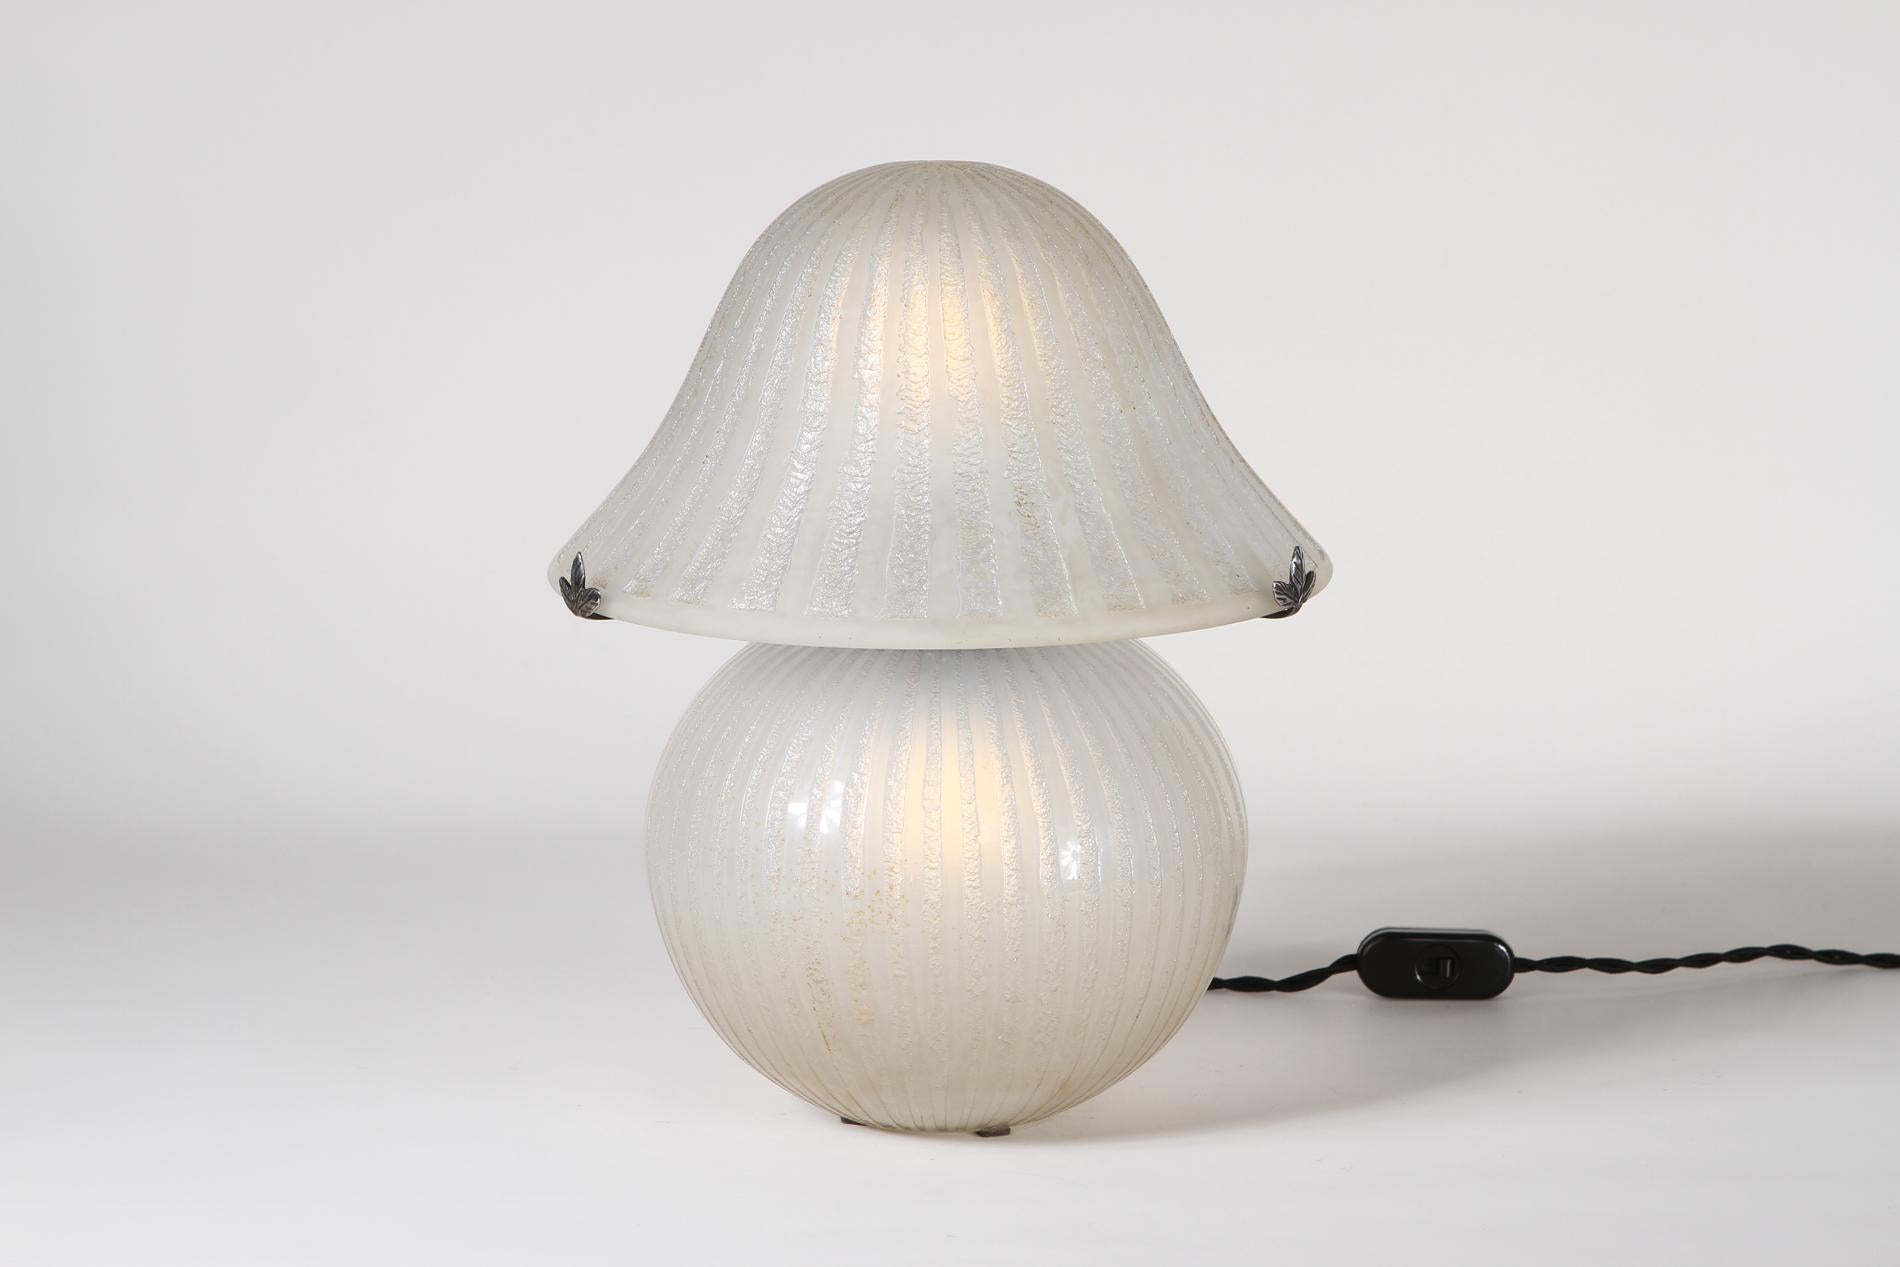 French Art Deco table lamp by Daum Nancy made around 1930 in acid-etched glass. The speciality of the lamp is to be all in glass, the base and lampshade. Very beautiful and delicate work. 